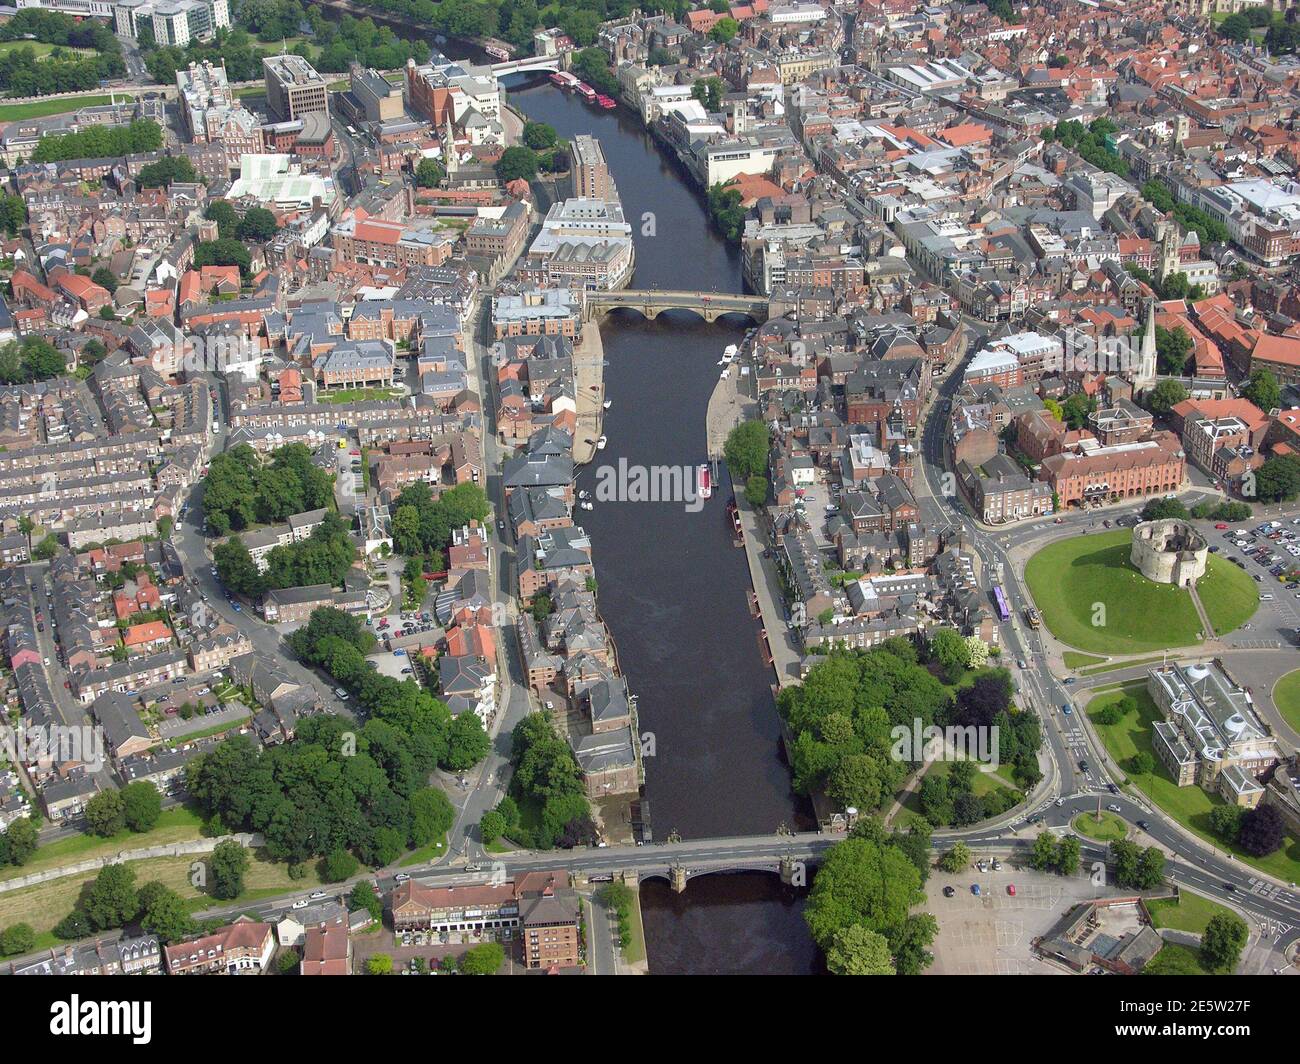 aerial view of York city centre, incl Jorvik Viking Centre, Cliffords Tower (castle) & area around Bridge Street over the River Ouse, and Kings Staith Stock Photo